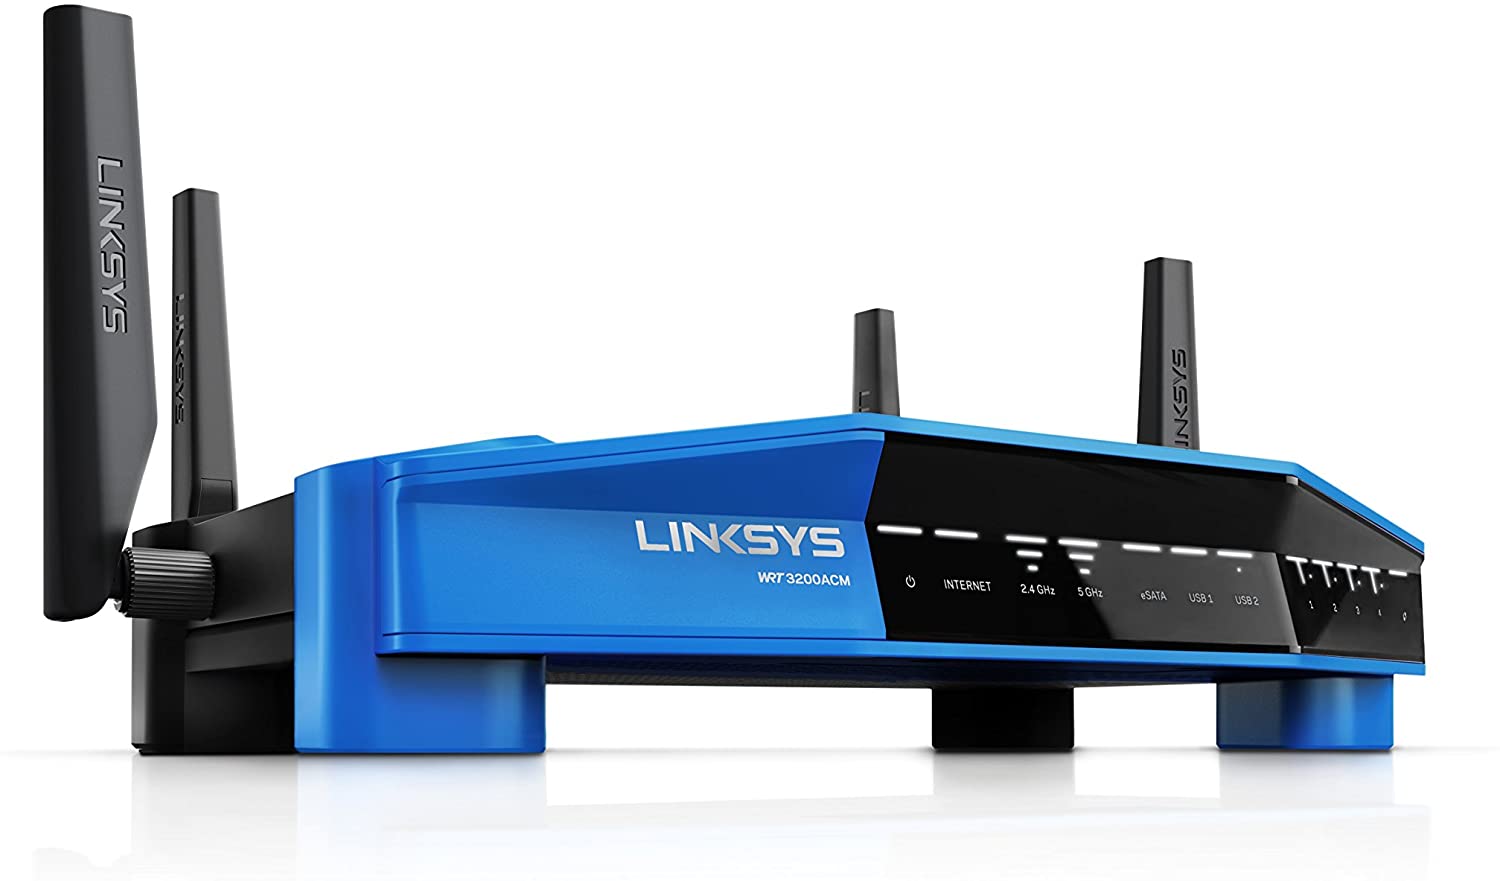 VPN Router Discount Code: oct20 save £20 on a new vpnrouter